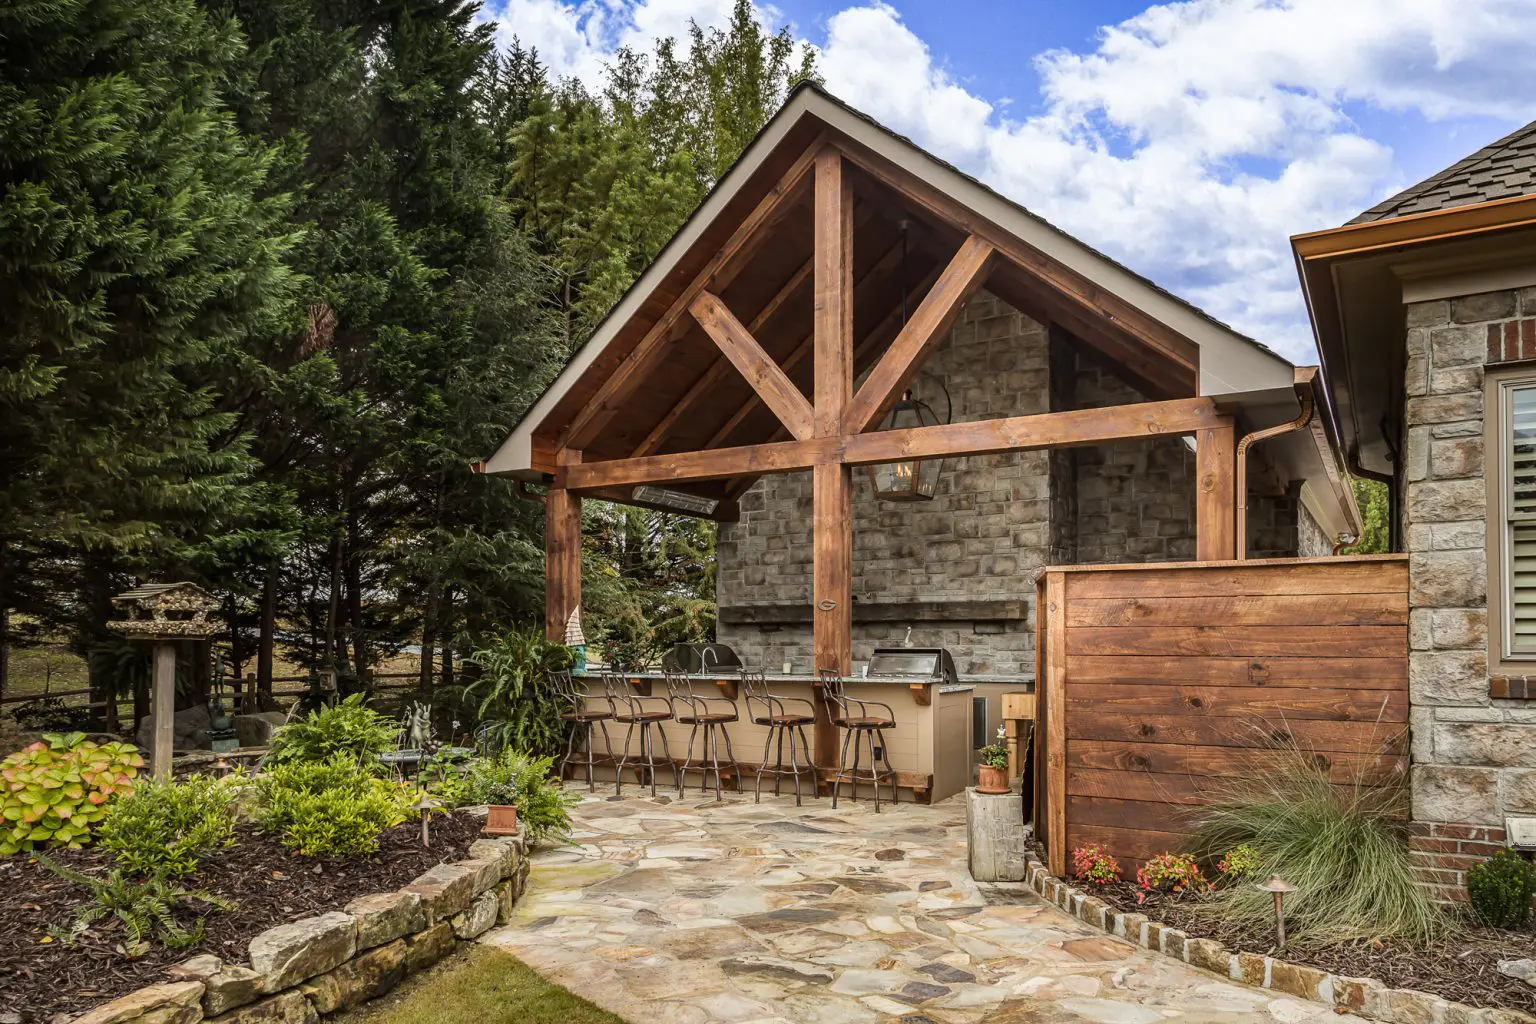 Outdoor kitchen pavilion with stone walls, wooden beams, and bar seating in a garden setting.